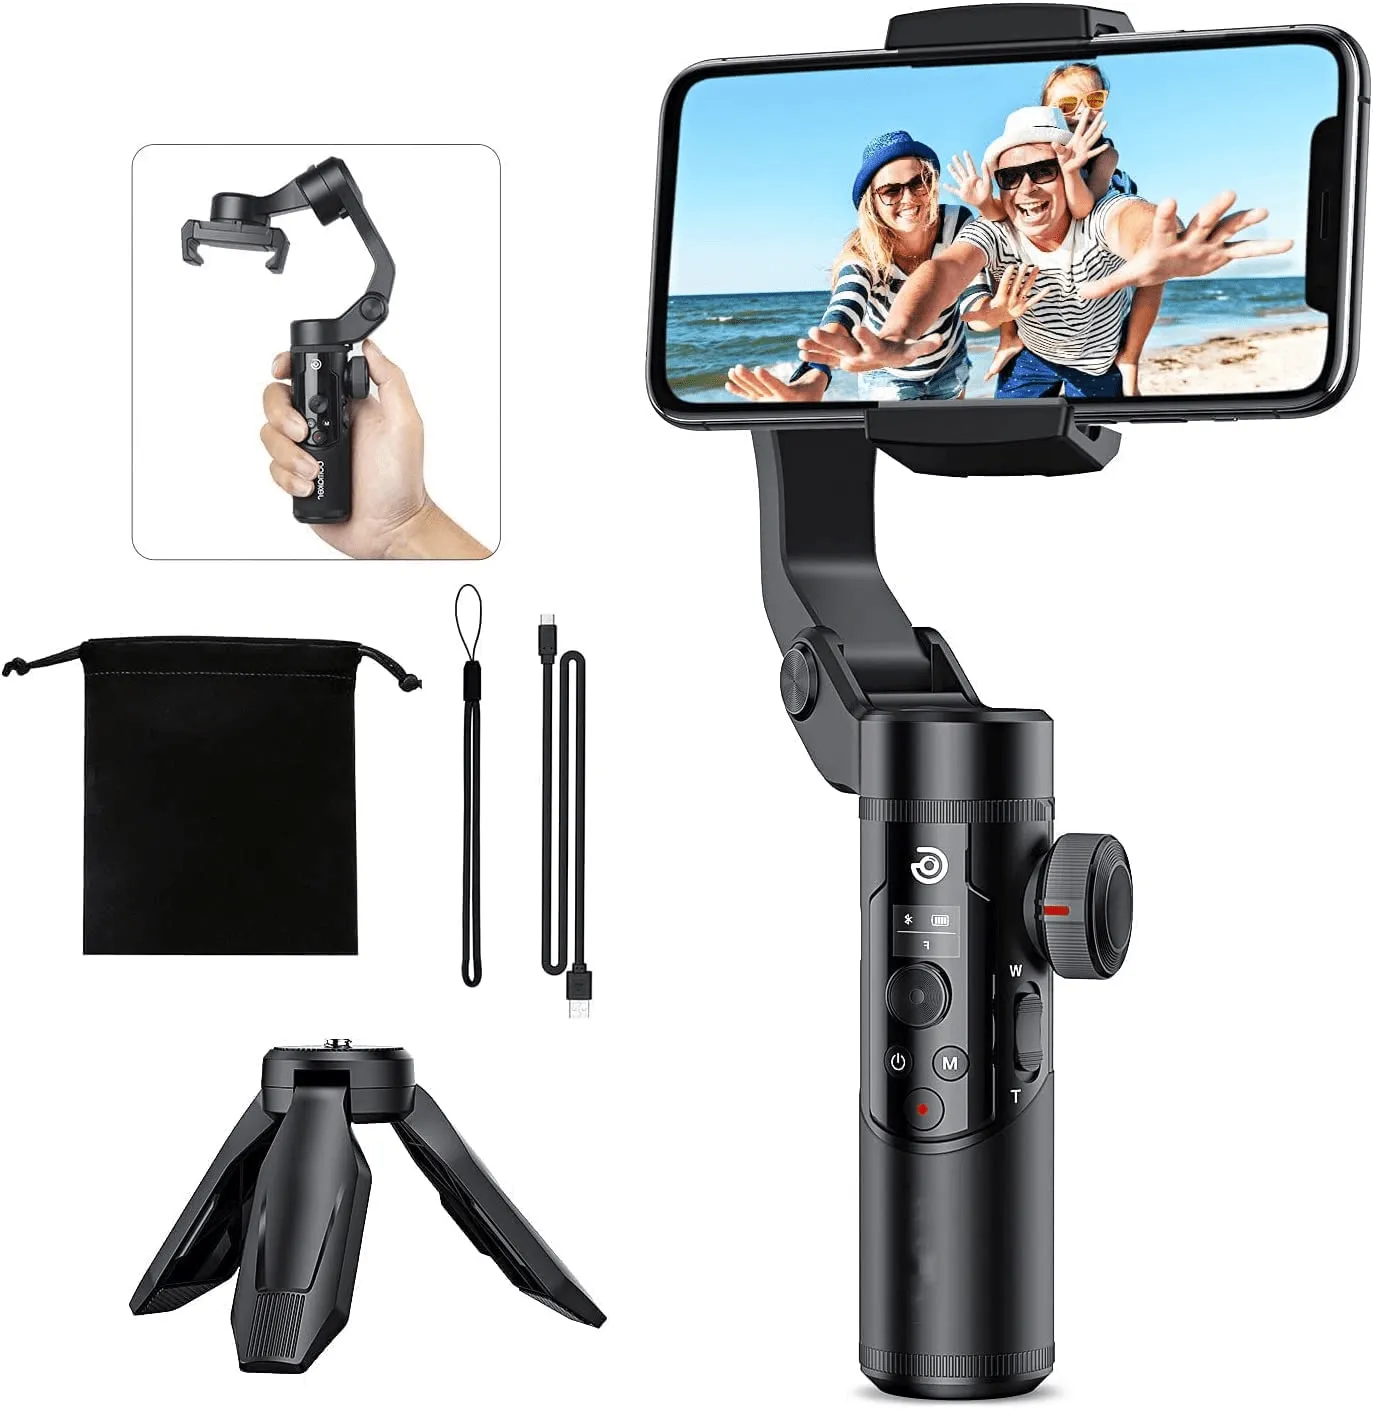 3-Axis Gimbal Stabilizer for Smartphones